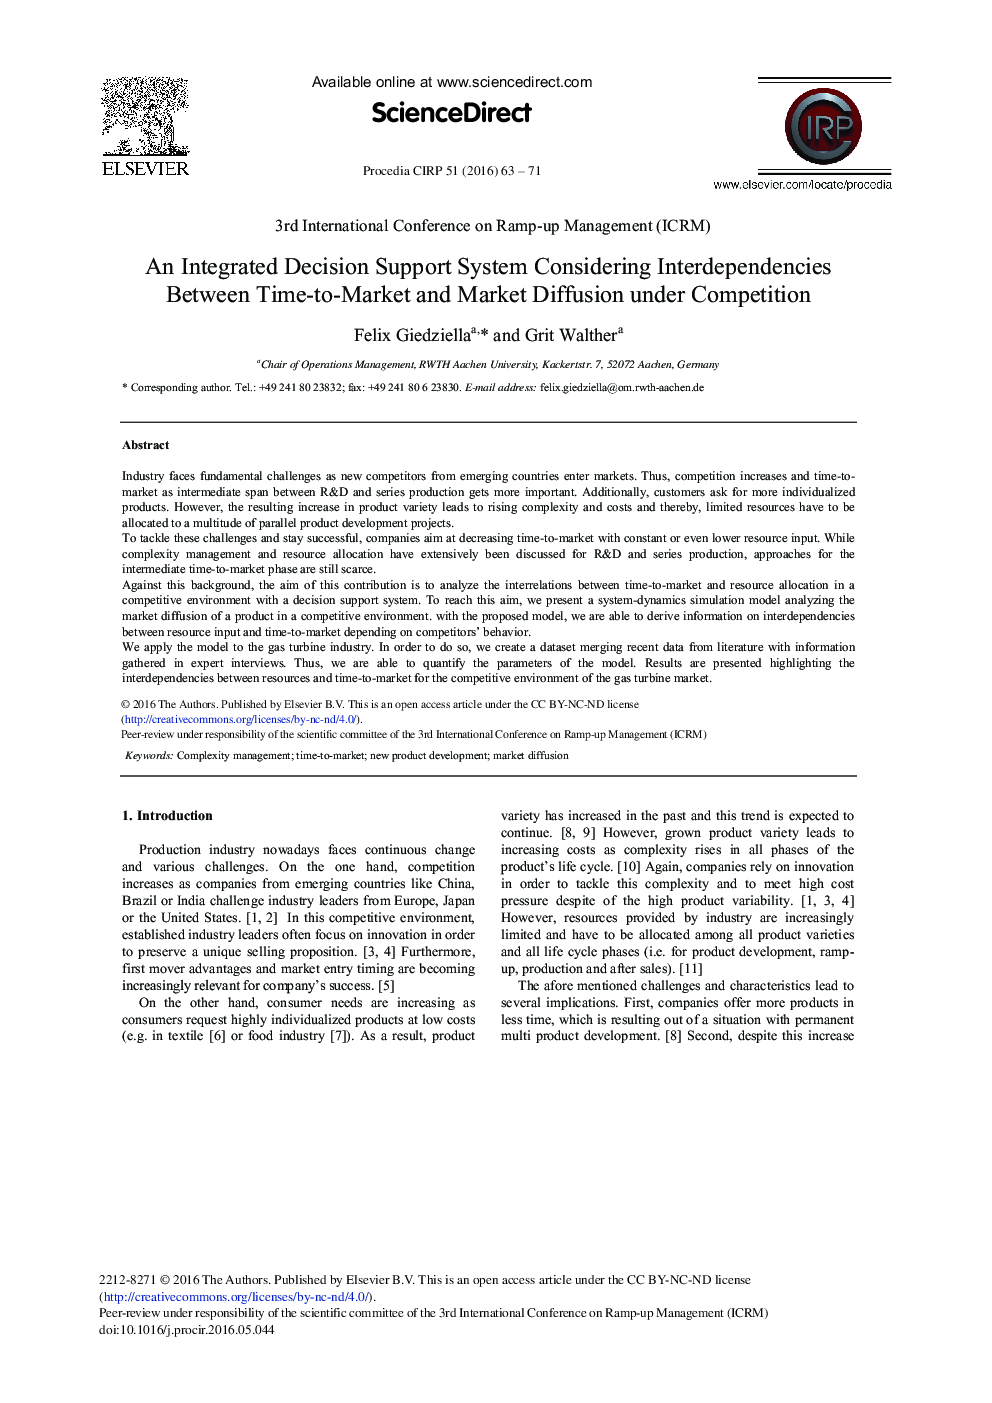 An Integrated Decision Support System Considering Interdependencies Between Time-to-Market and Market Diffusion under Competition 